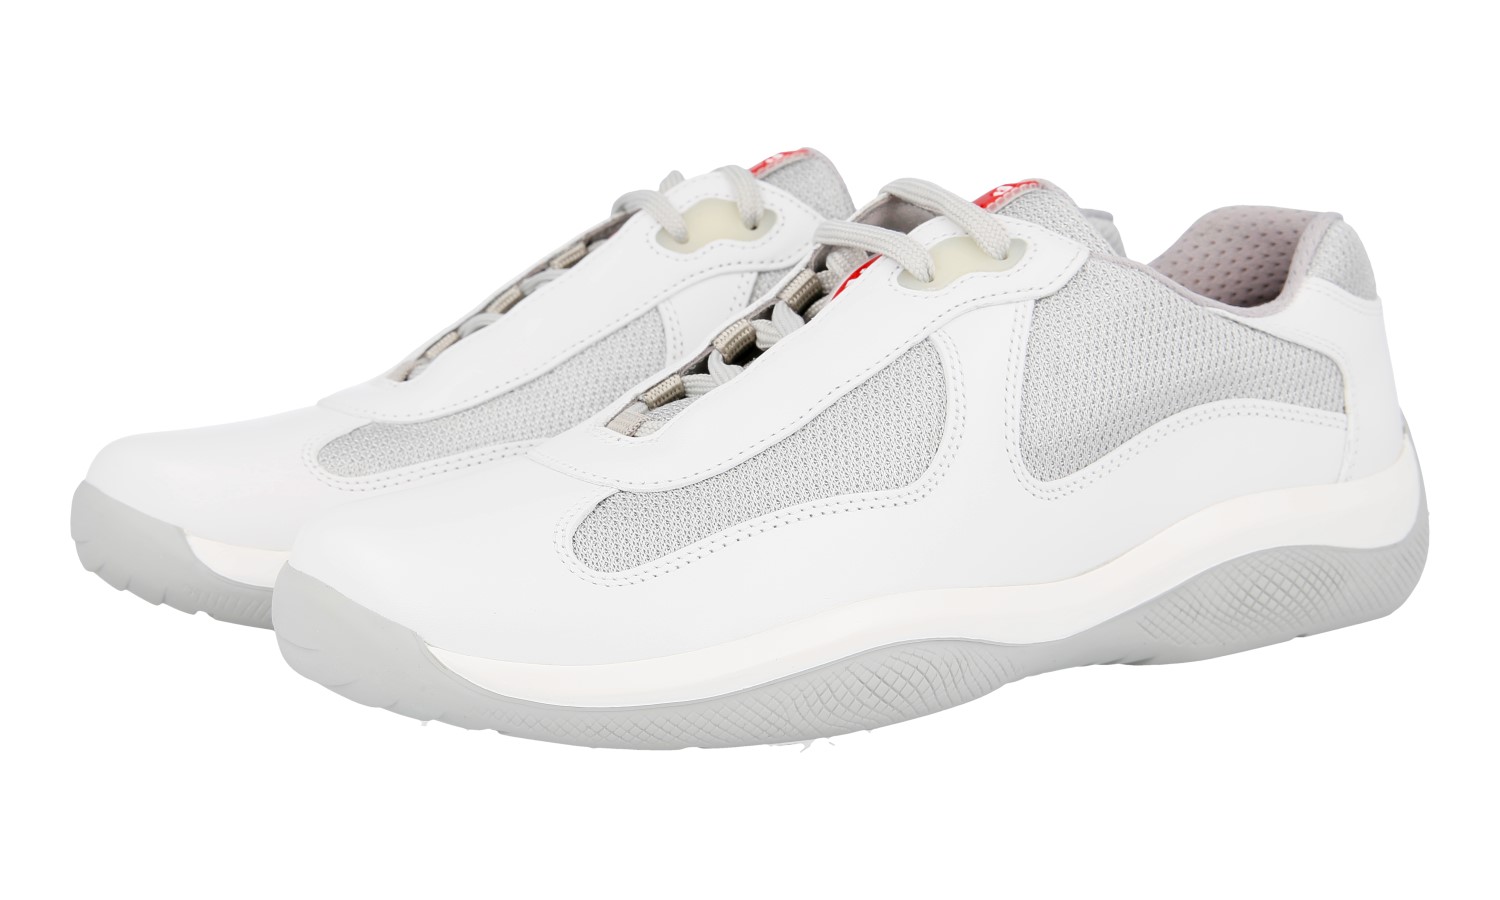 AUTH PRADA AMERICAS CUP SNEAKERS SHOES PS0906 WHITE NEW US 12 EU 45 45